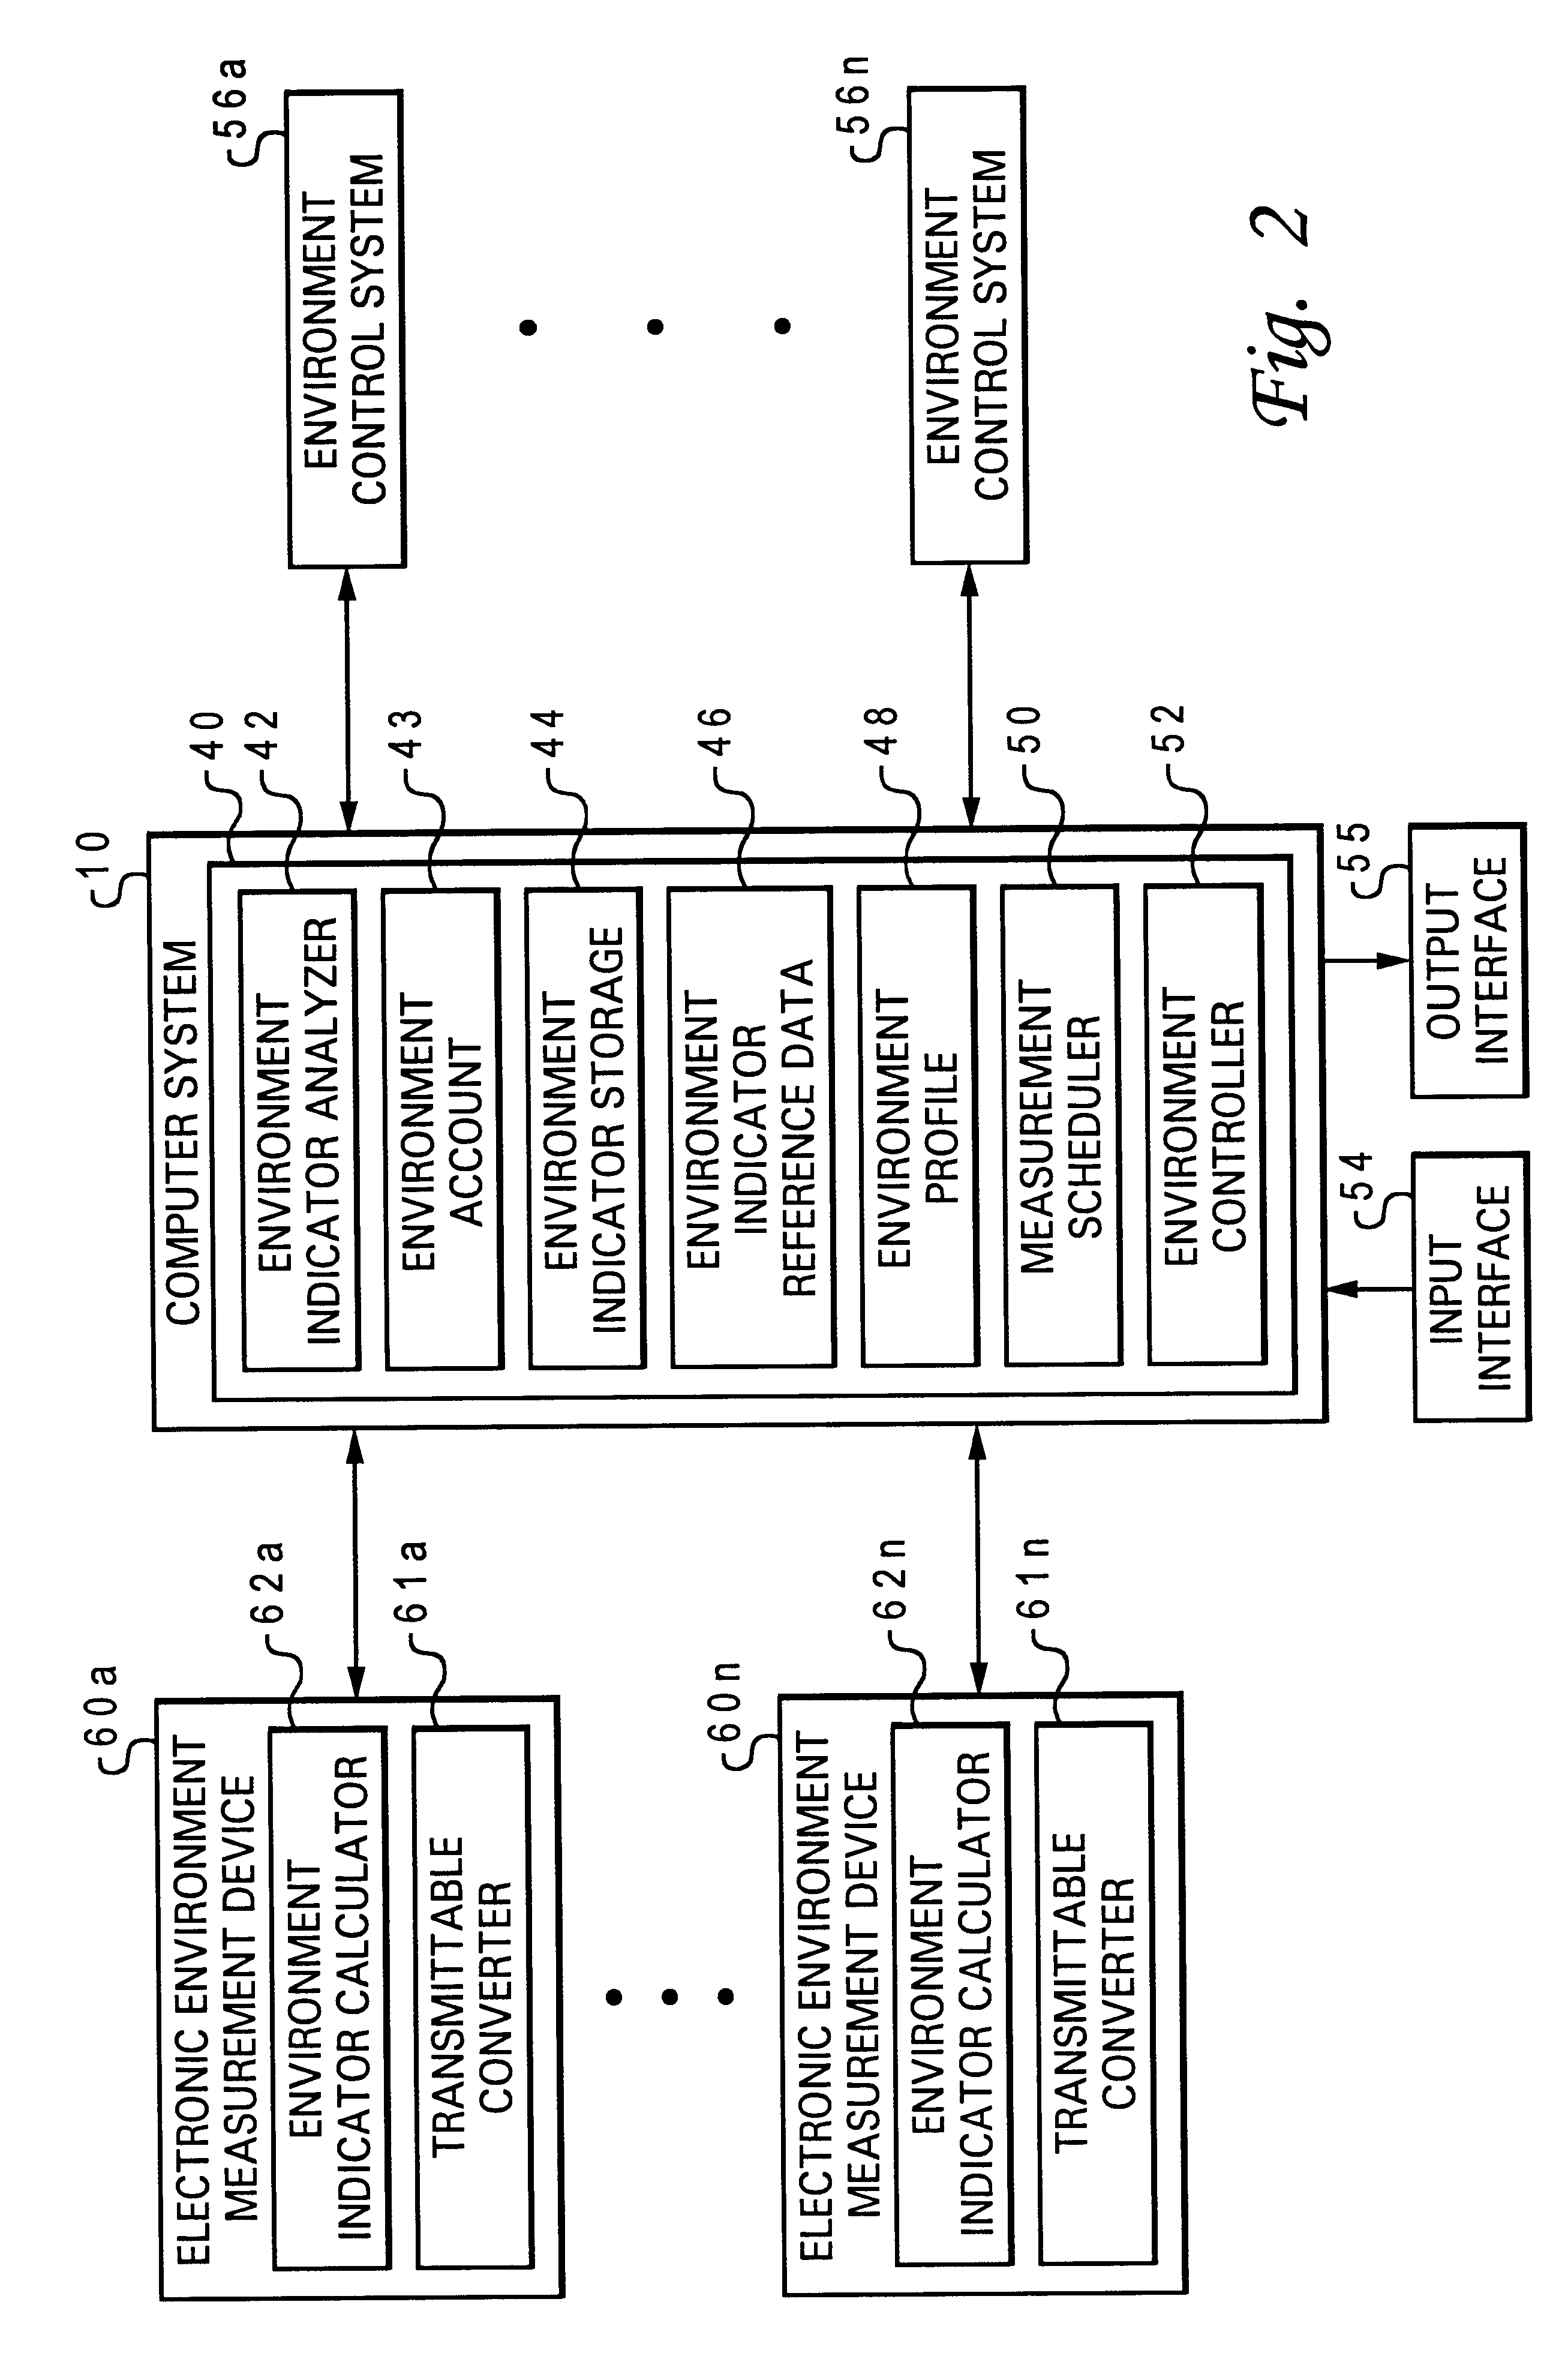 Managing an environment utilizing a portable data processing system